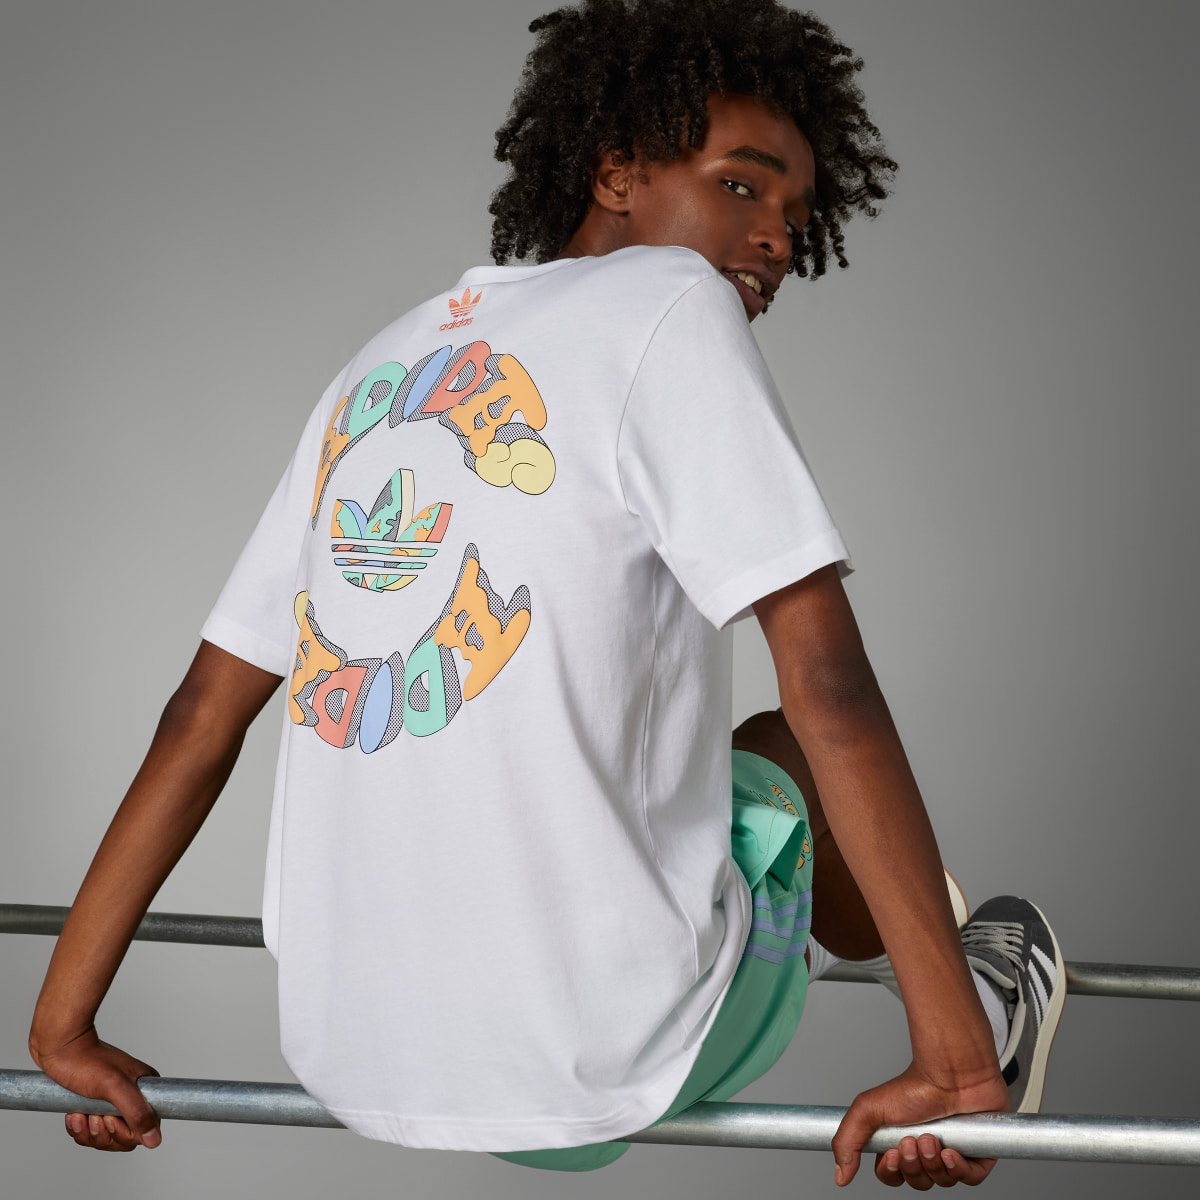 Adidas Enjoy Summer Front/Back Graphic Tee. 6